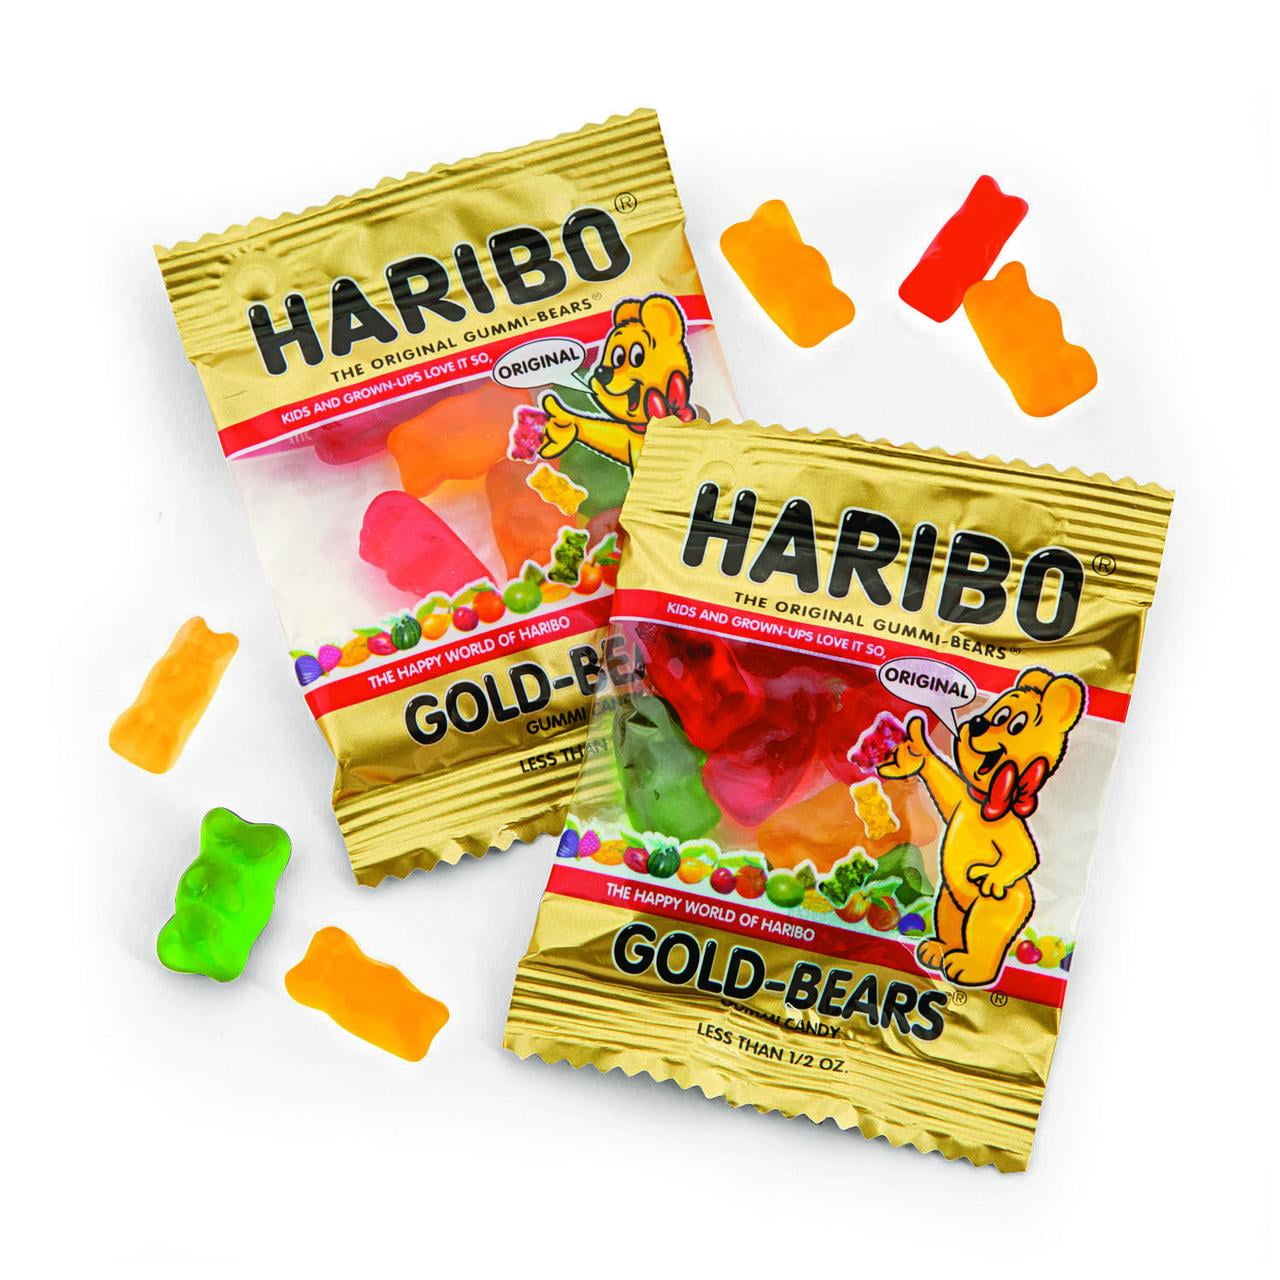 5 DOLLS HOUSE MINIATURE HARIBO PACKETS OF SWEETS 